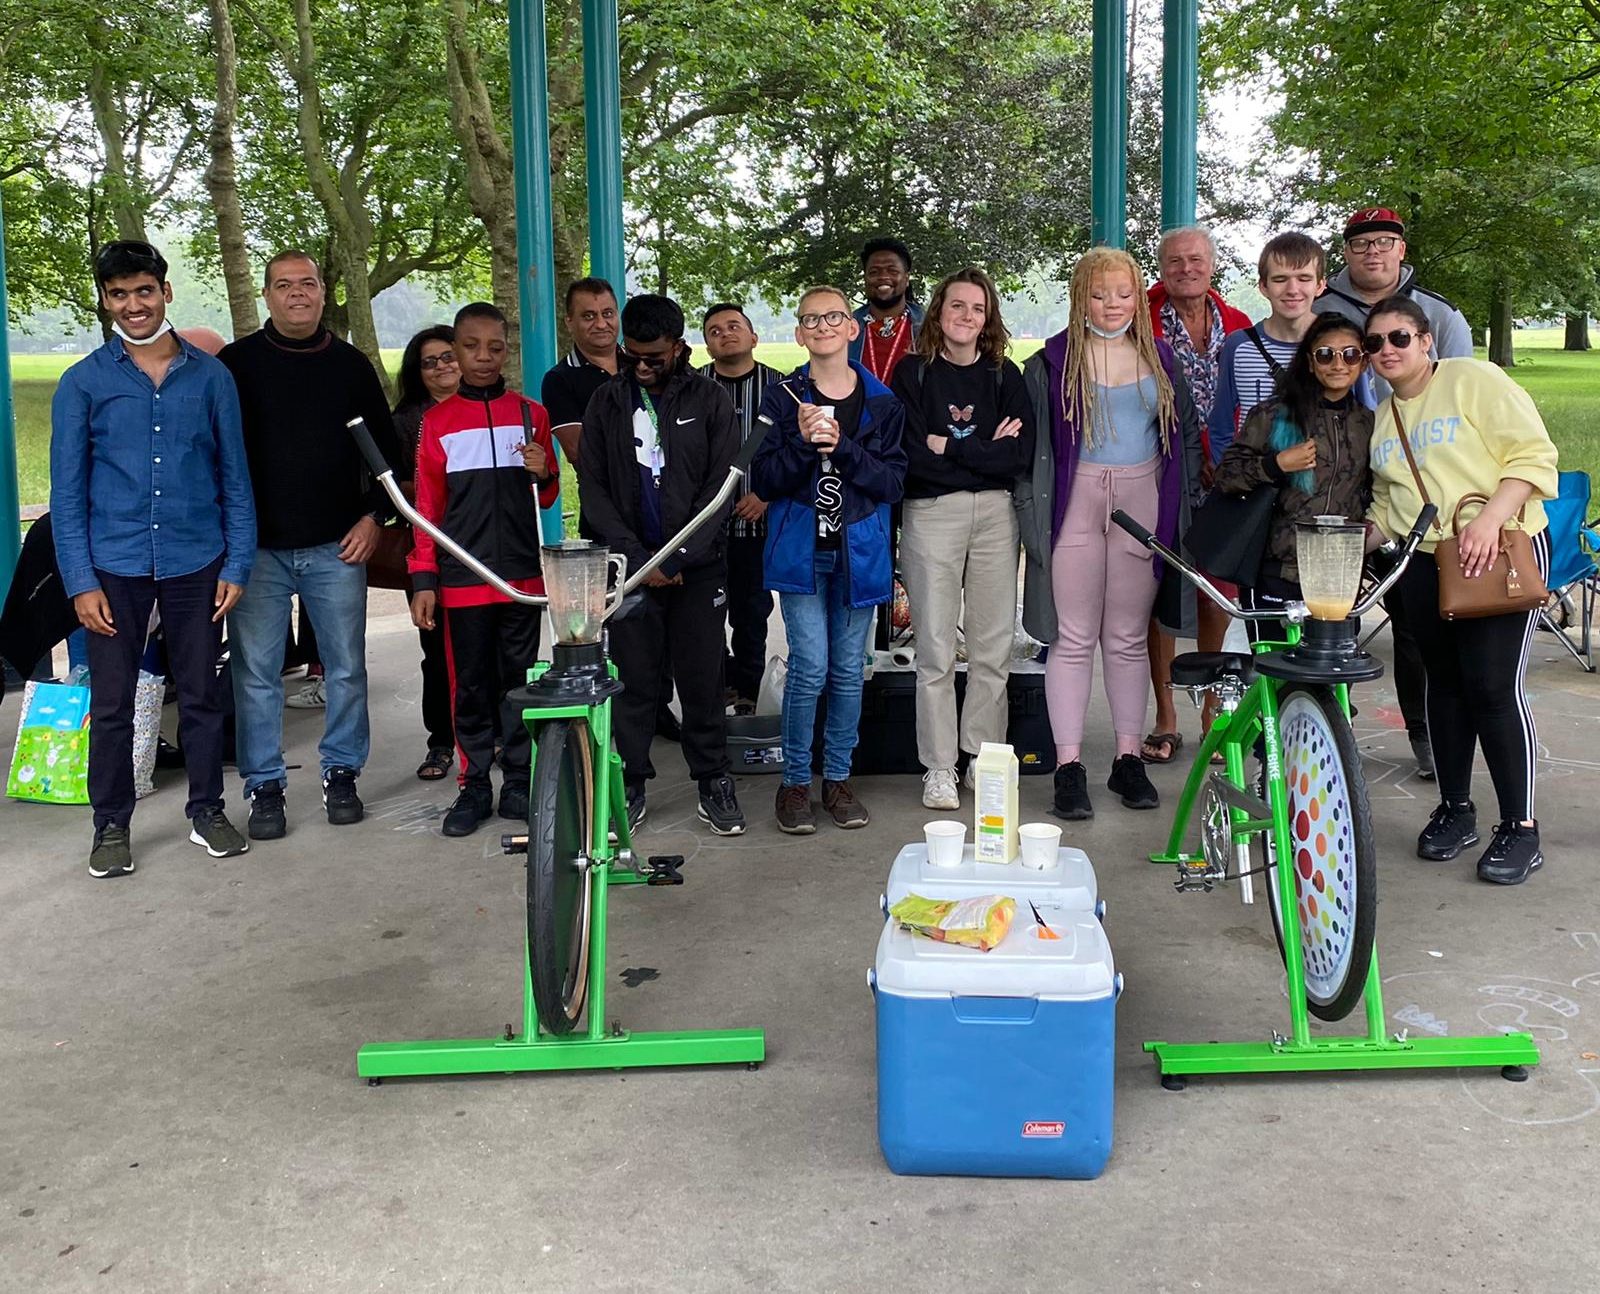 Group of young people standing together at Victoria park with two pedal powered smoothie bikes in front of them.